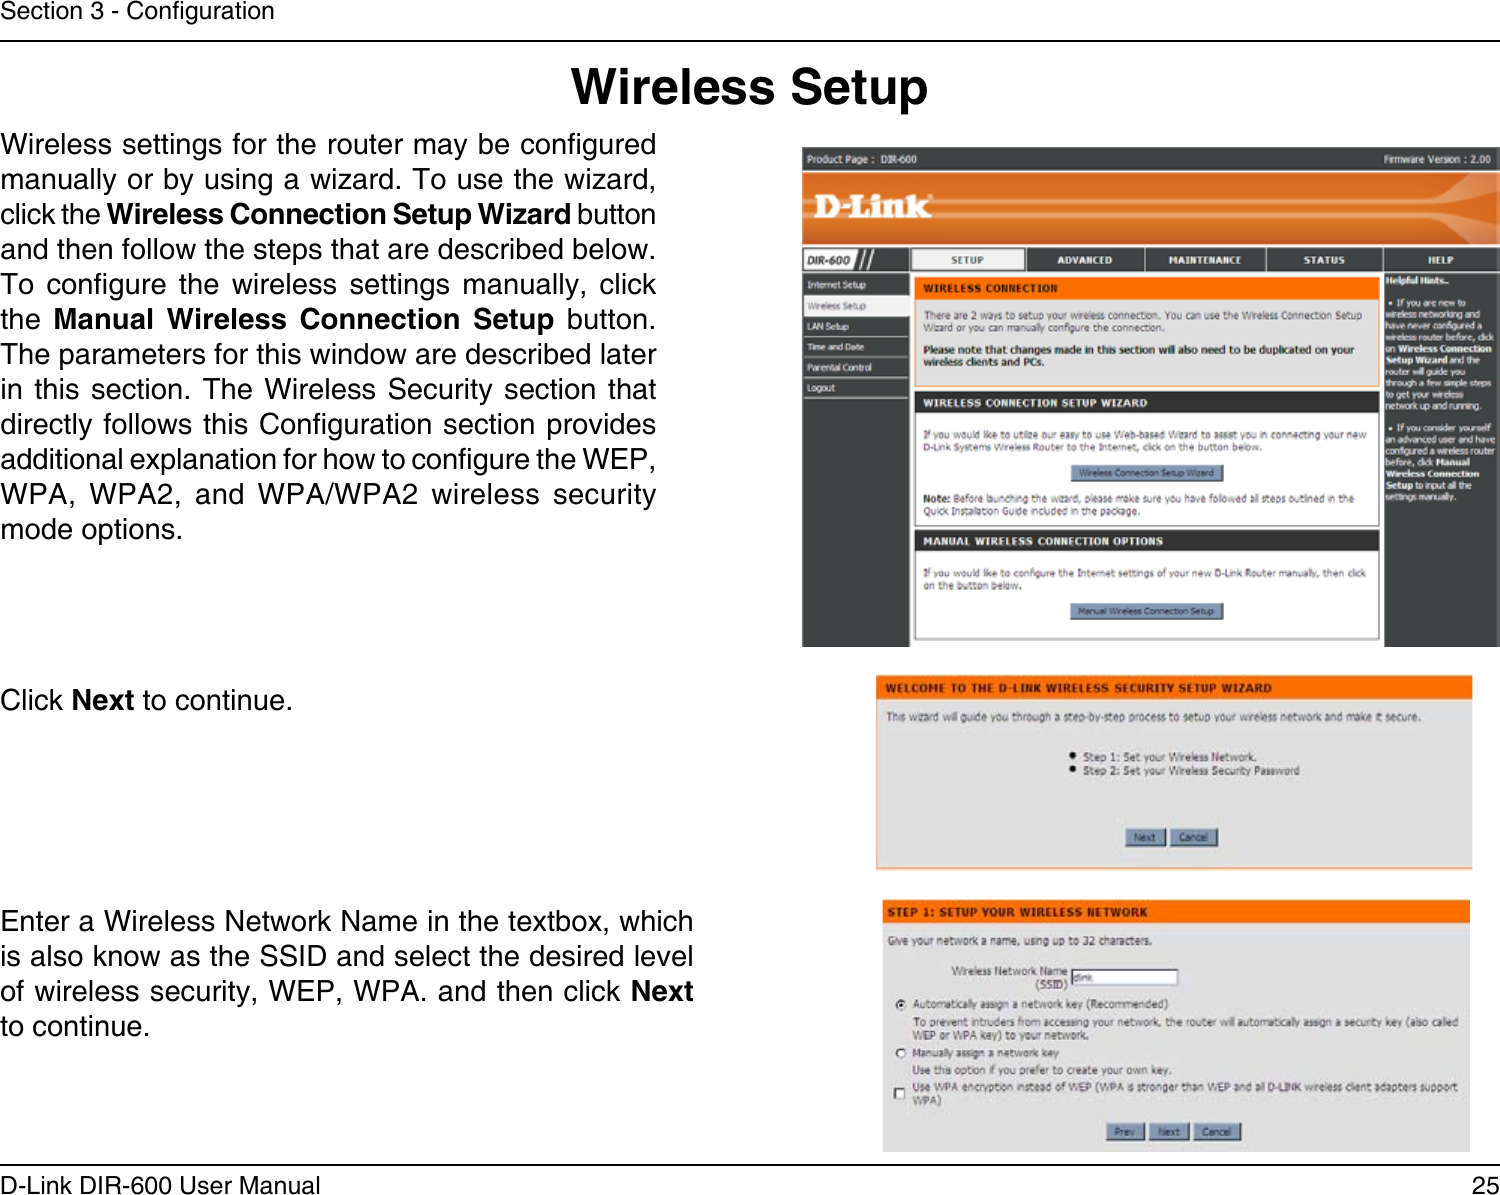 25D-Link DIR-600 User ManualSection 3 - CongurationWireless SetupWireless settings for the router may be congured manually or by using a wizard. To use the wizard, click the Wireless Connection Setup Wizard button and then follow the steps that are described below. To  congure  the  wireless  settings  manually,  click the  Manual  Wireless  Connection Setup  button. The parameters for this window are described later in this section.  The Wireless Security  section that directly follows this Conguration section provides  additional explanation for how to congure the WEP, WPA,  WPA2,  and  WPA/WPA2  wireless  security mode options. Click Next to continue.Enter a Wireless Network Name in the textbox, which is also know as the SSID and select the desired level of wireless security, WEP, WPA. and then click Next to continue.